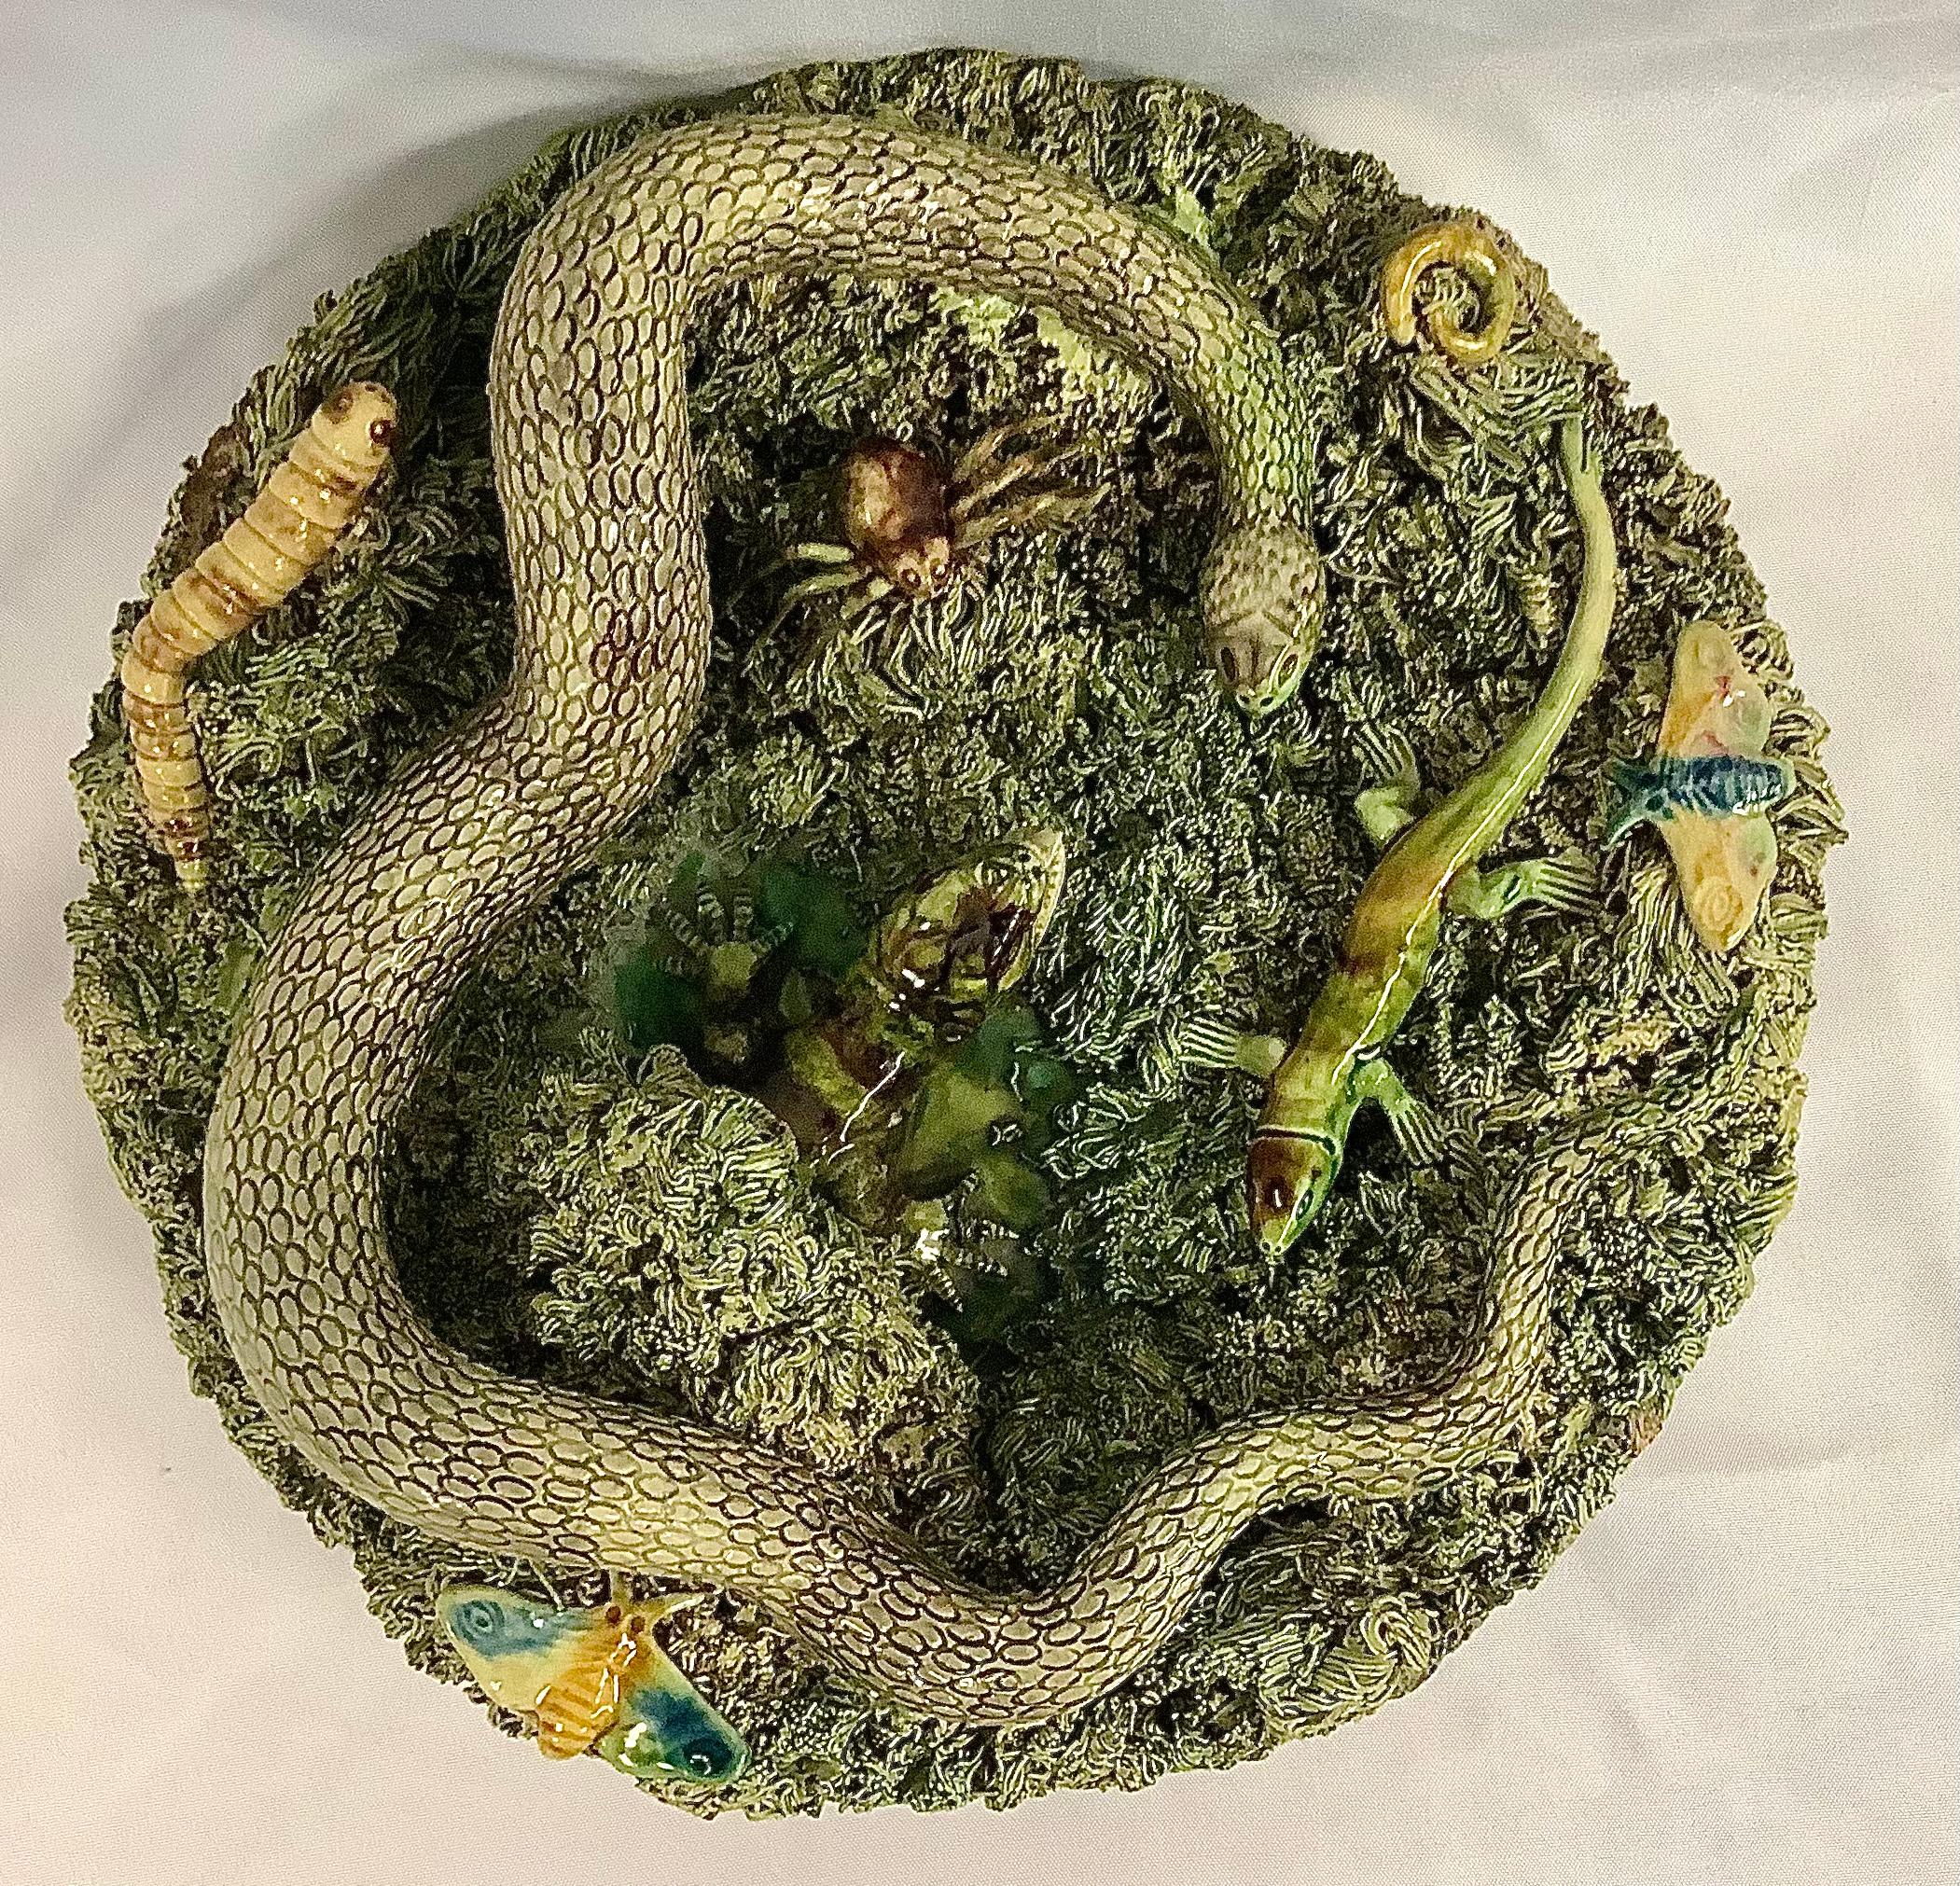 Antique 19th century Portuguese Majolica Palissy style plate. Plate focuses on large snake and large lizard, with worm, caterpillar, butterfly, and lizard surrounding in the brown and green grassy tuft. Signed Jose Alves Cunha (Caldas Rainha).